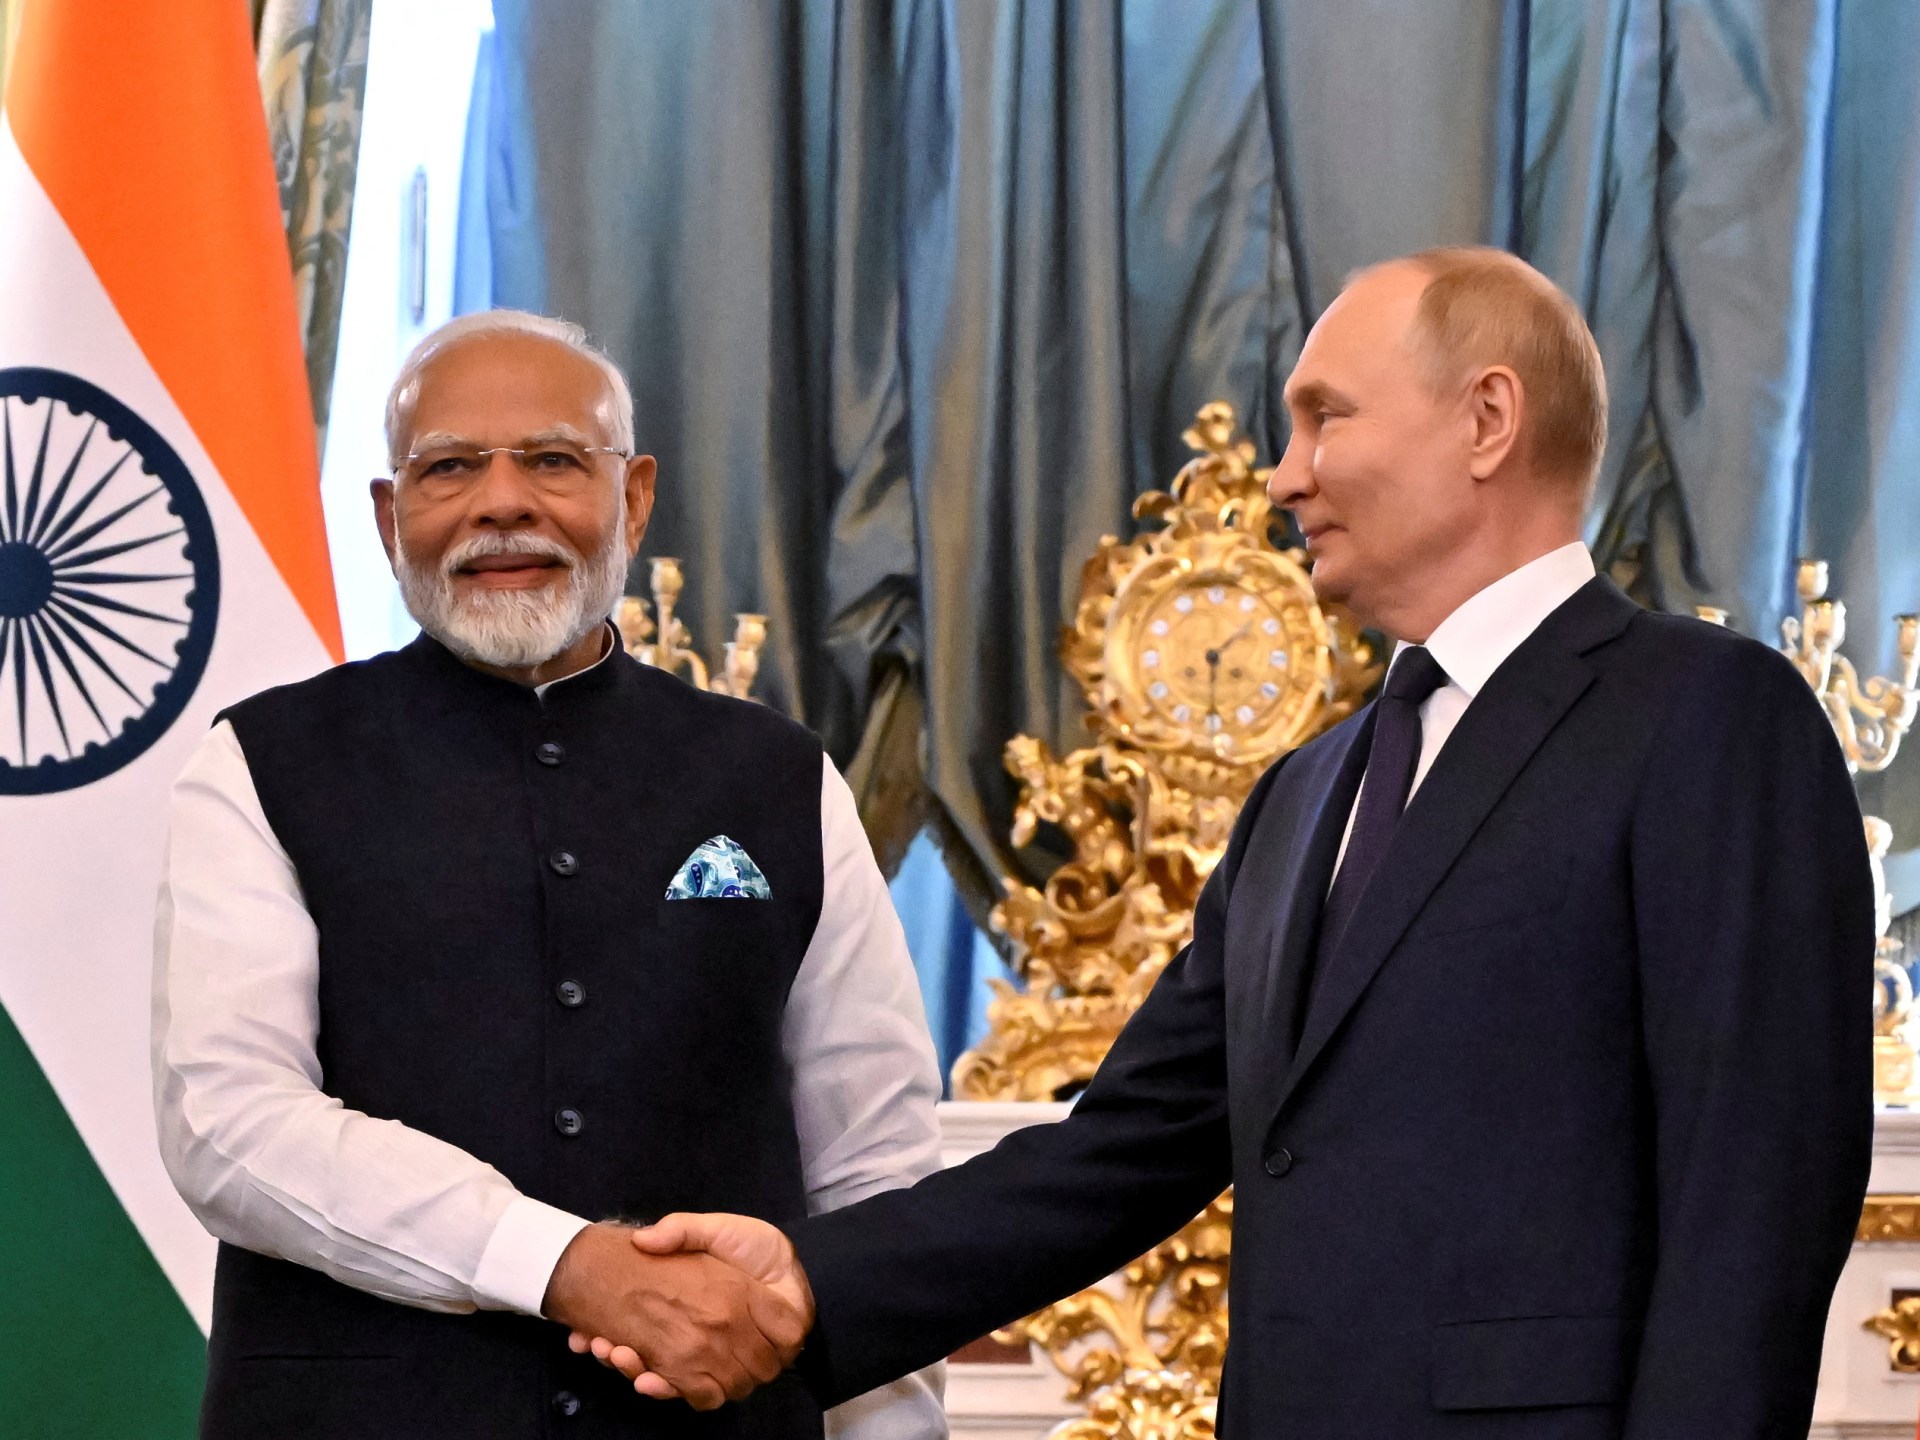 What lies behind arms talks between India’s Modi and Russia’s Putin? | Weapons News